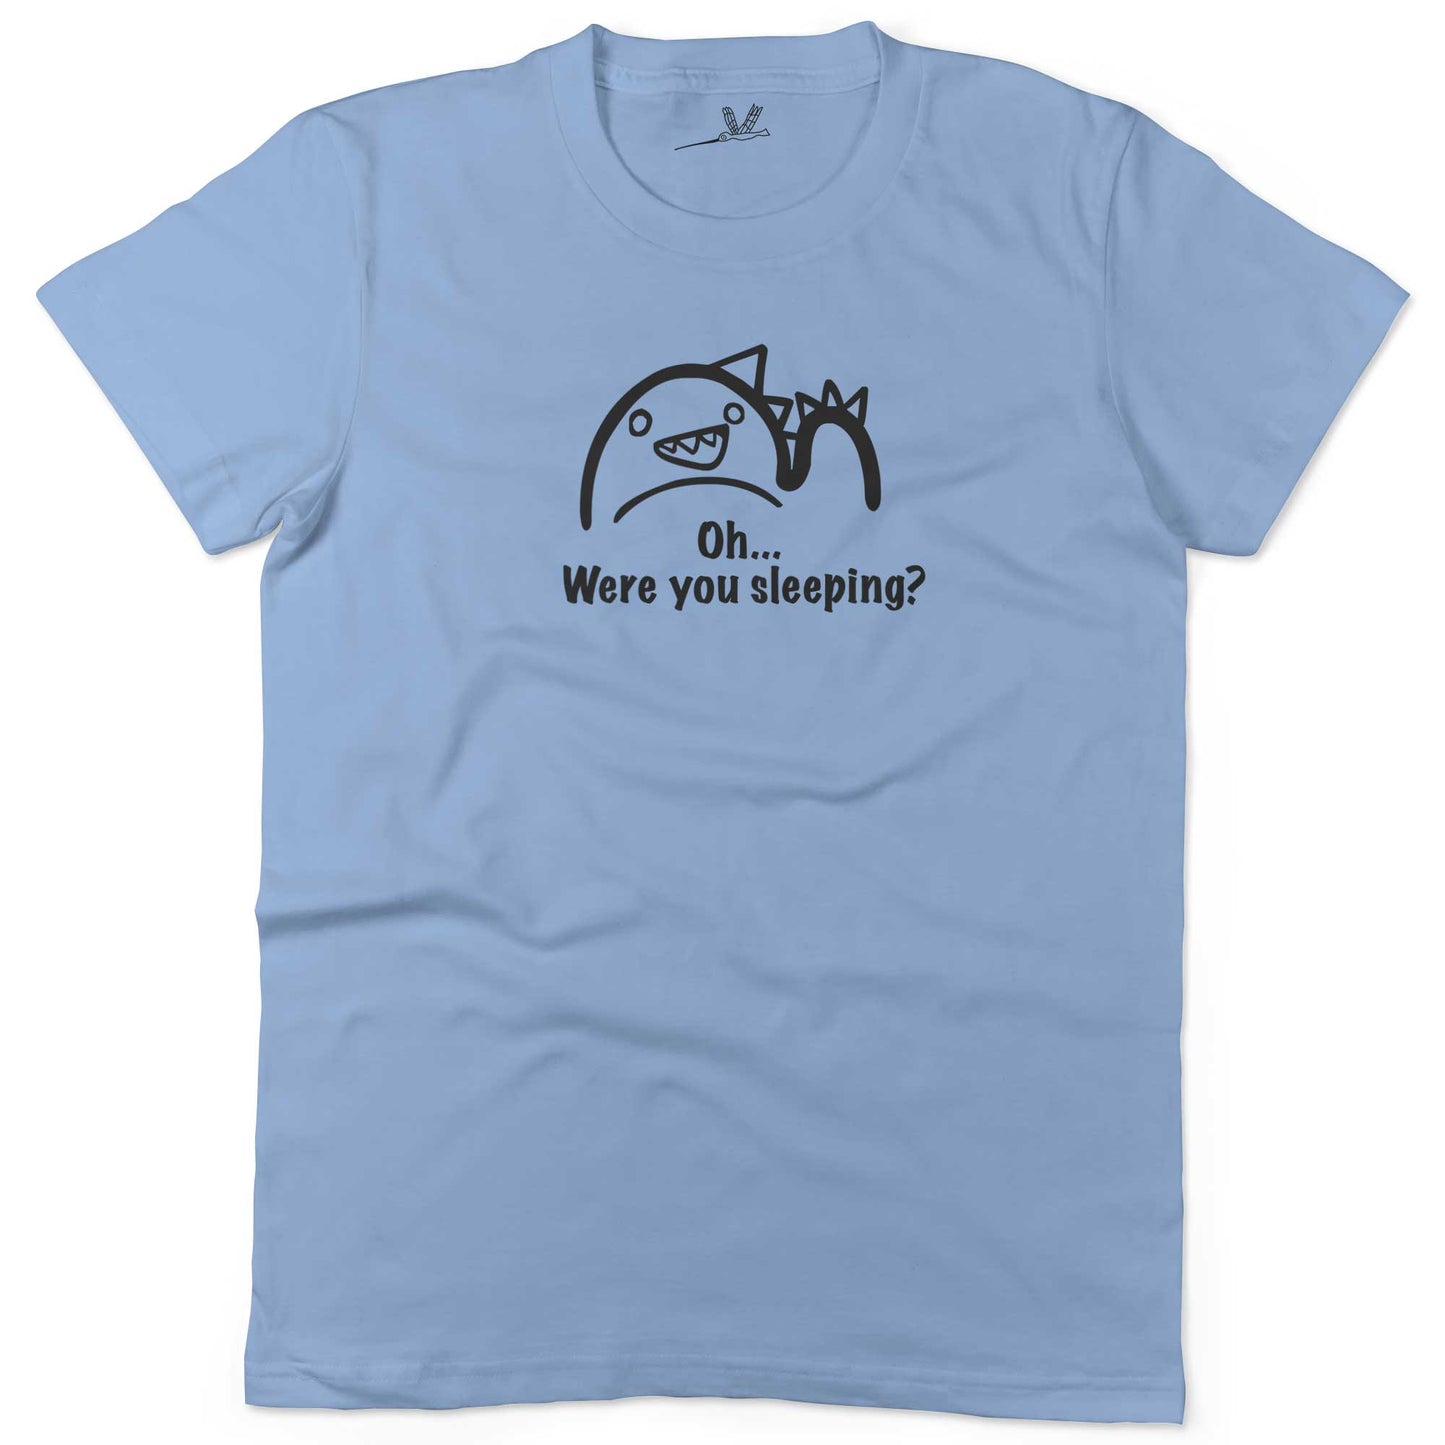 Oh...Were you sleeping? Women's or Unisex Funny T-shirt-Baby Blue-Woman